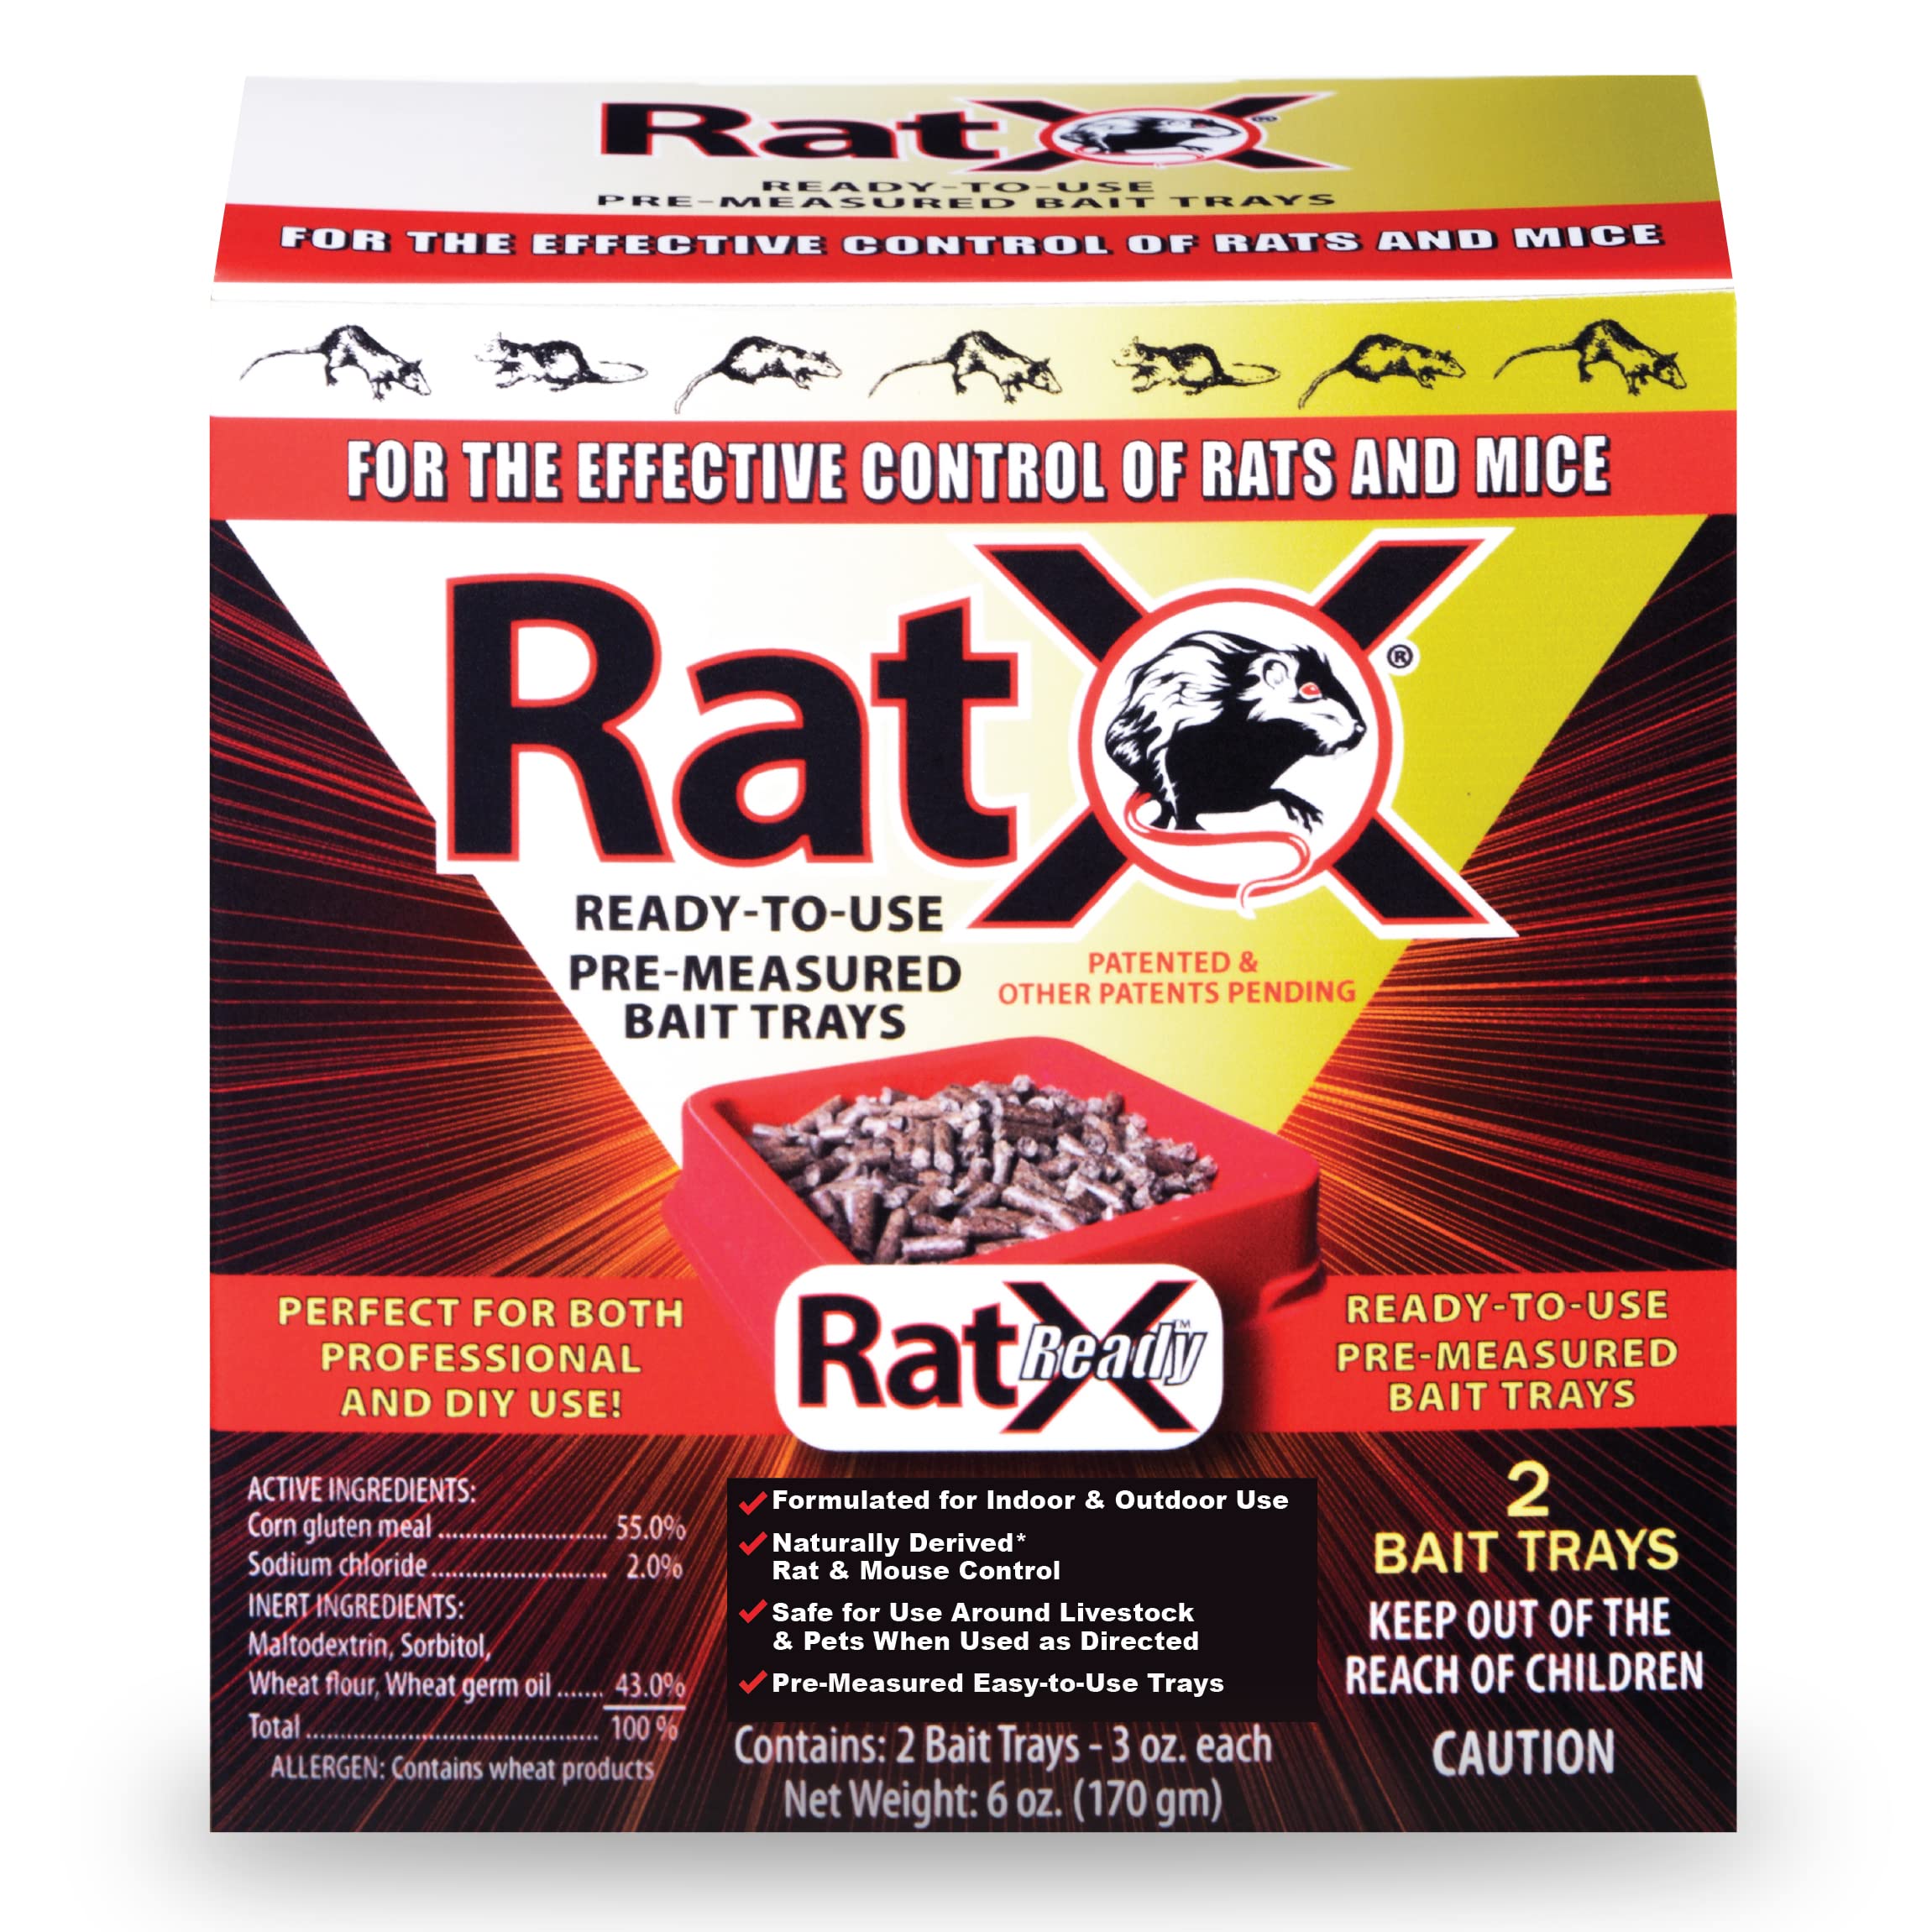 EcoClear Products 620104, RatX All-Natural Non-Toxic Humane Rat and Mouse Pellets, Ready-to-Use Pre-Measured 3 oz. Bait Trays, 2-Pack